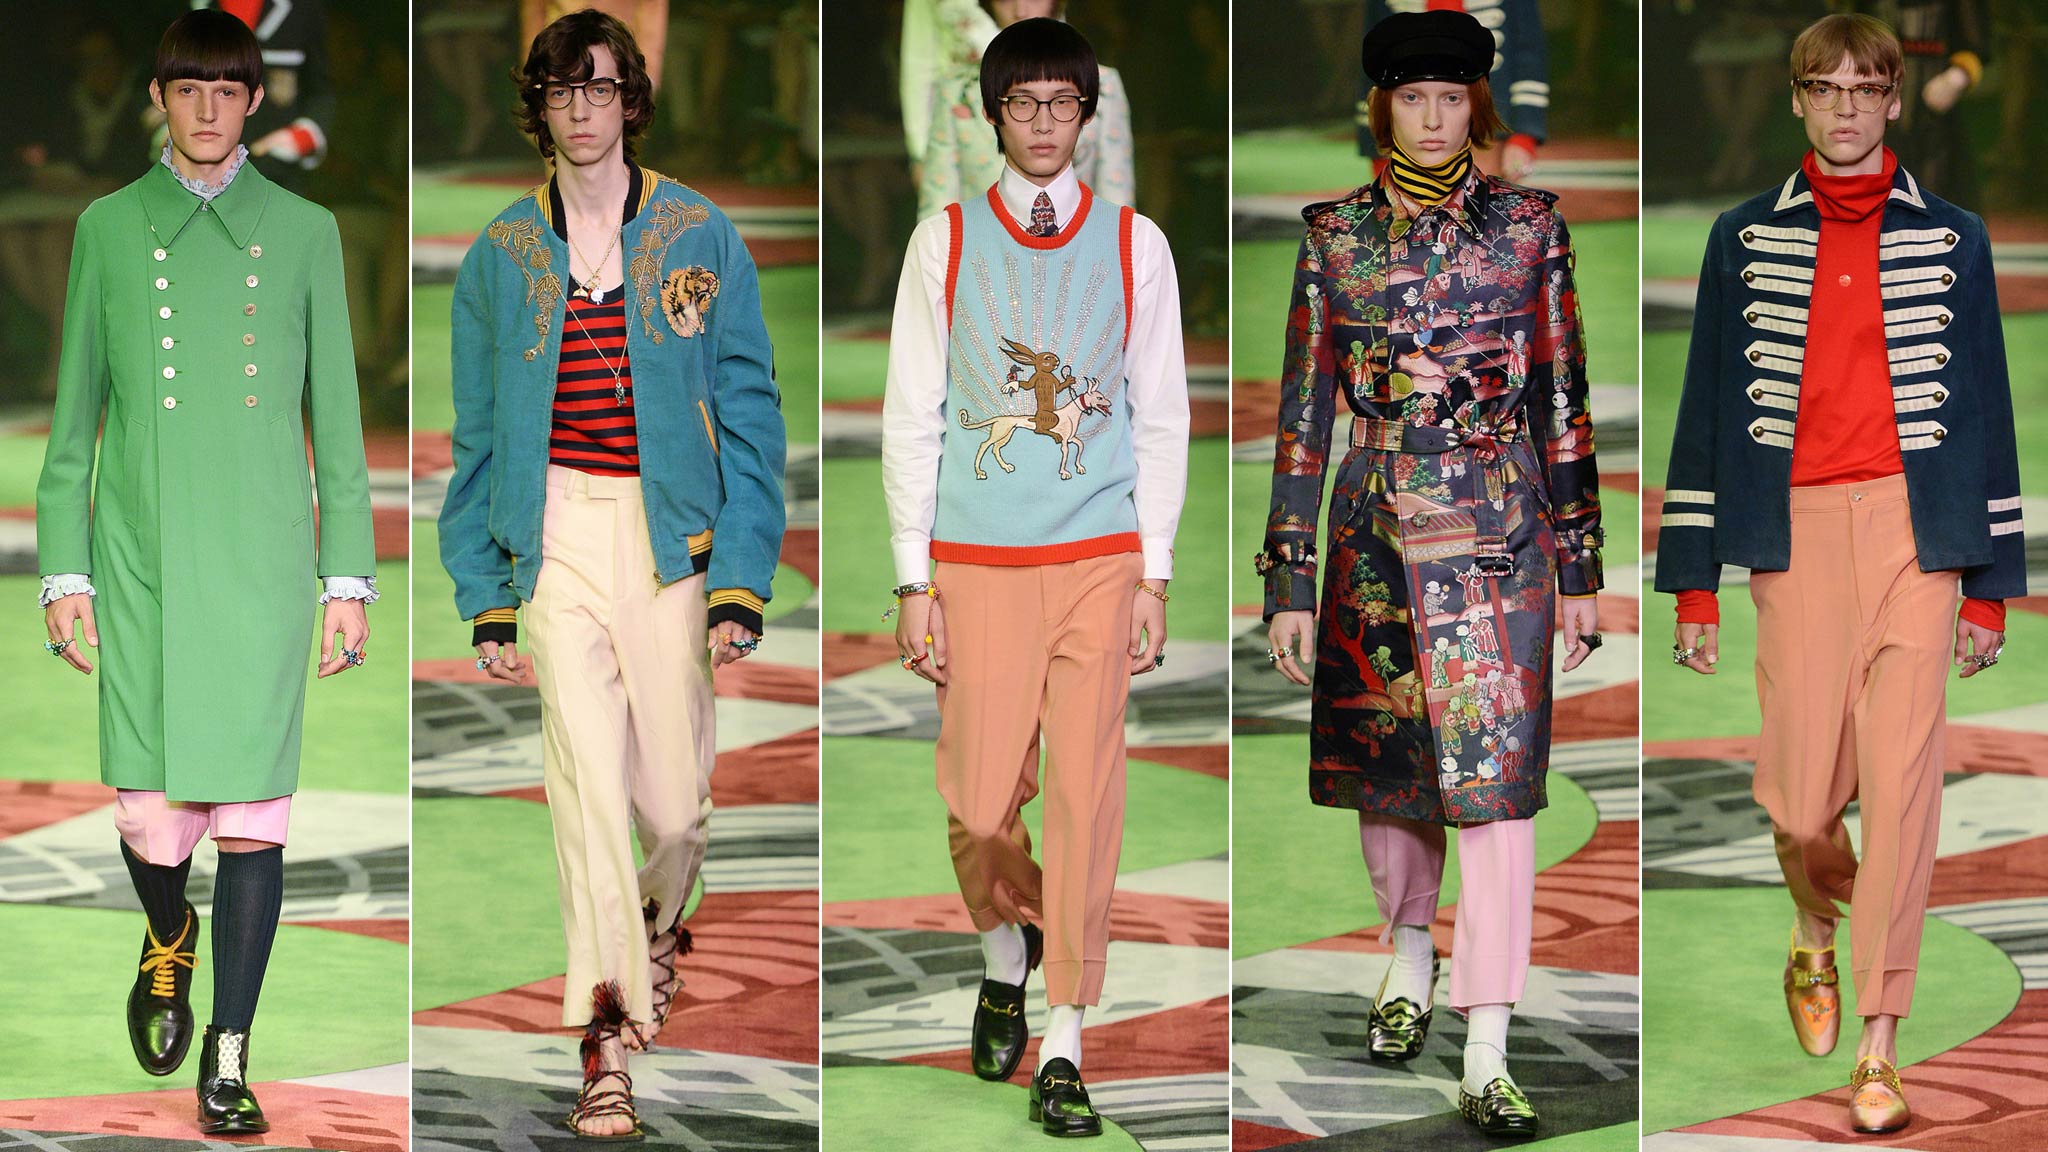 The Gucci's Man comes back on the Milanese catwalks - Wait! Fashion